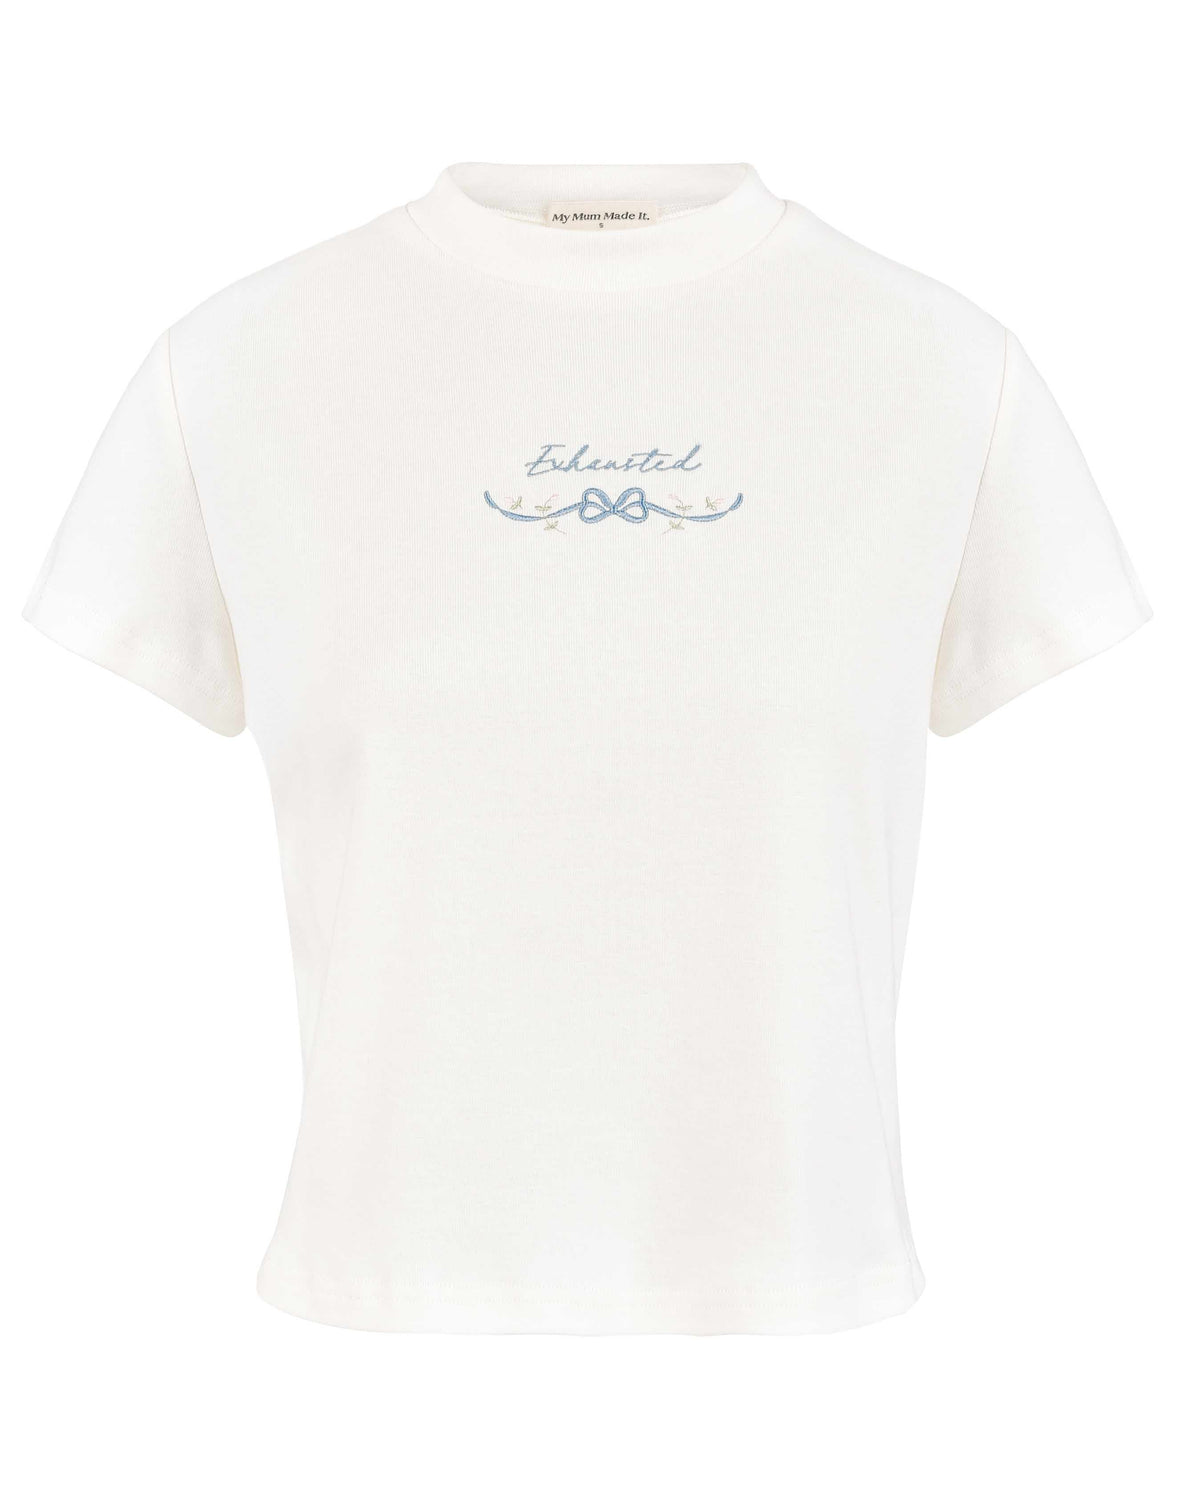 Exhausted Embroidery Fitted T-Shirt